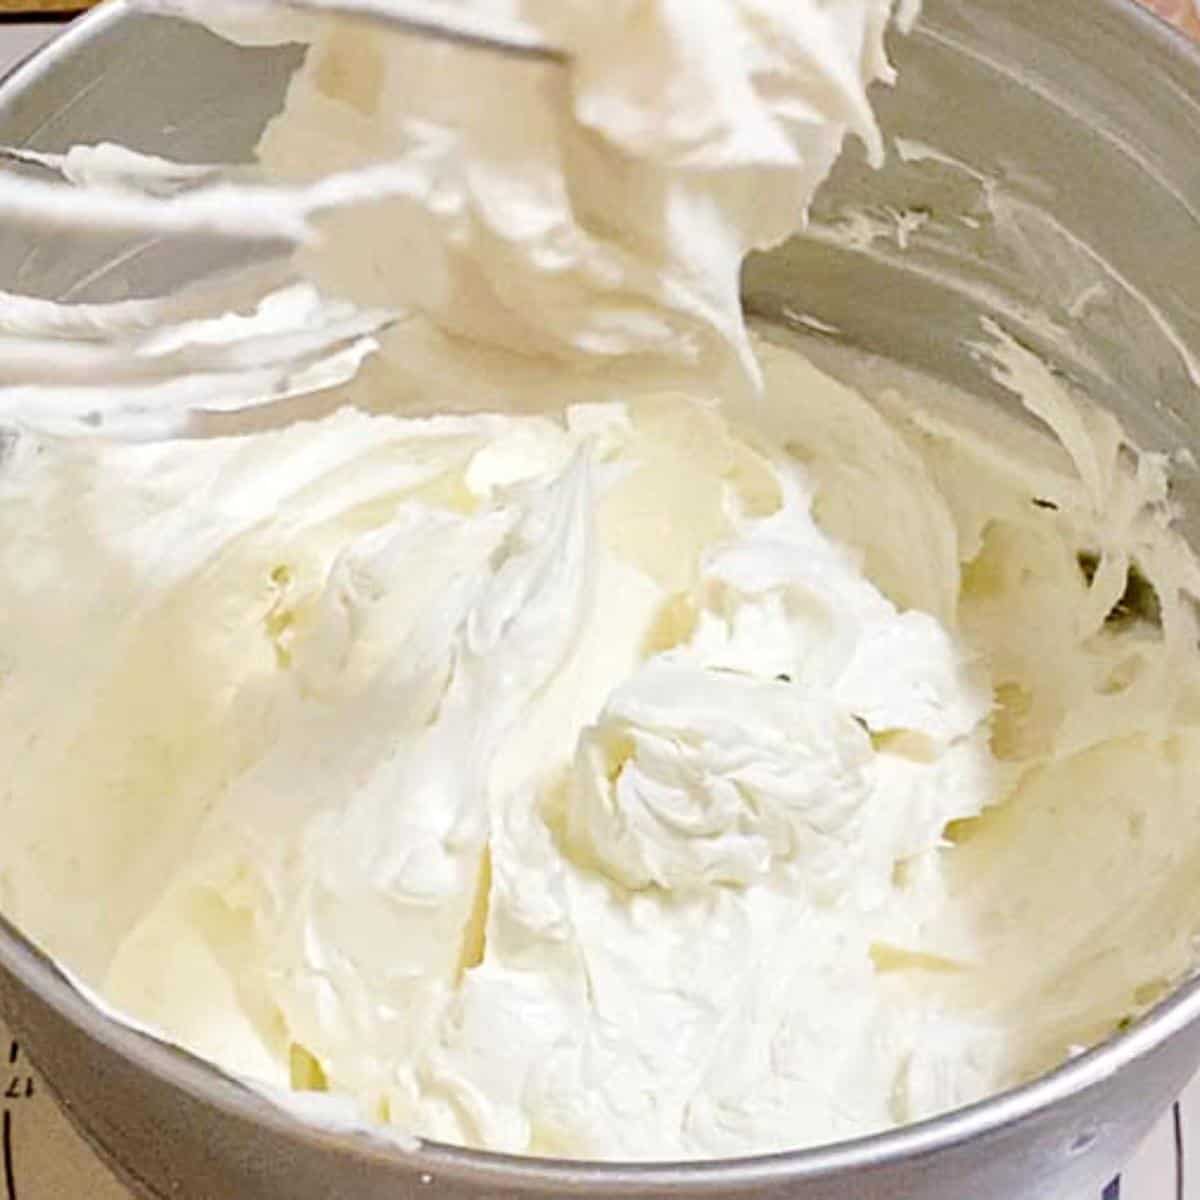 Whipping Ermine frosting in a stand mixer.